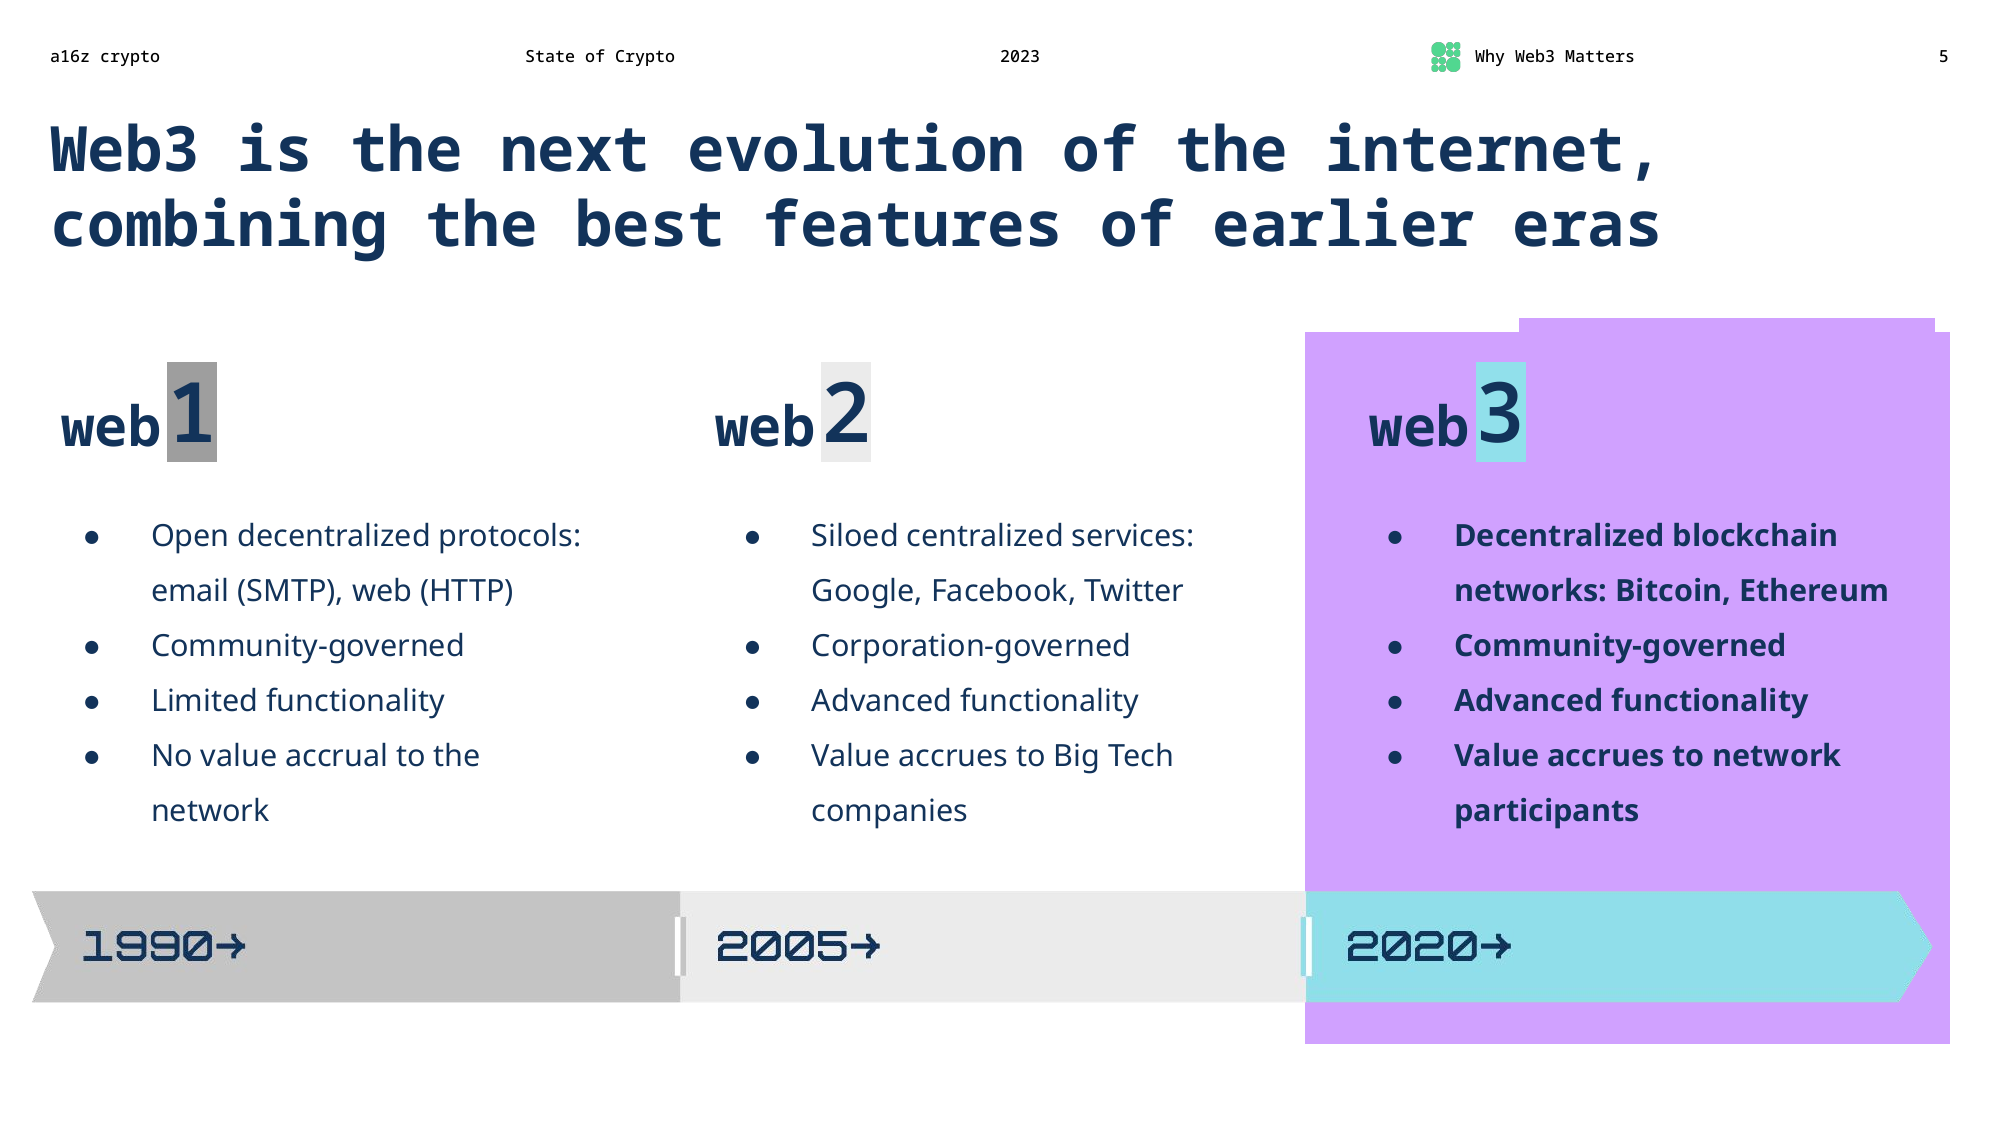 Web3 is the next evolution of the internet, combining the best features of earlier eras  web1 • Open decentralized protocols: email (SMTP), web (HTTP) • Community-governed • Limited functionality • No value accrual to the network 1990 →  web2 • Siloed centralized services: Google, Facebook, Twitter • Corporation-governed • Advanced functionality • Value accrues to Big Tech companies 2005 →  web3 • Decentralized blockchain networks: Bitcoin, Ethereum • Community-governed • Advanced functionality • Value accrues to network participants 2020 →